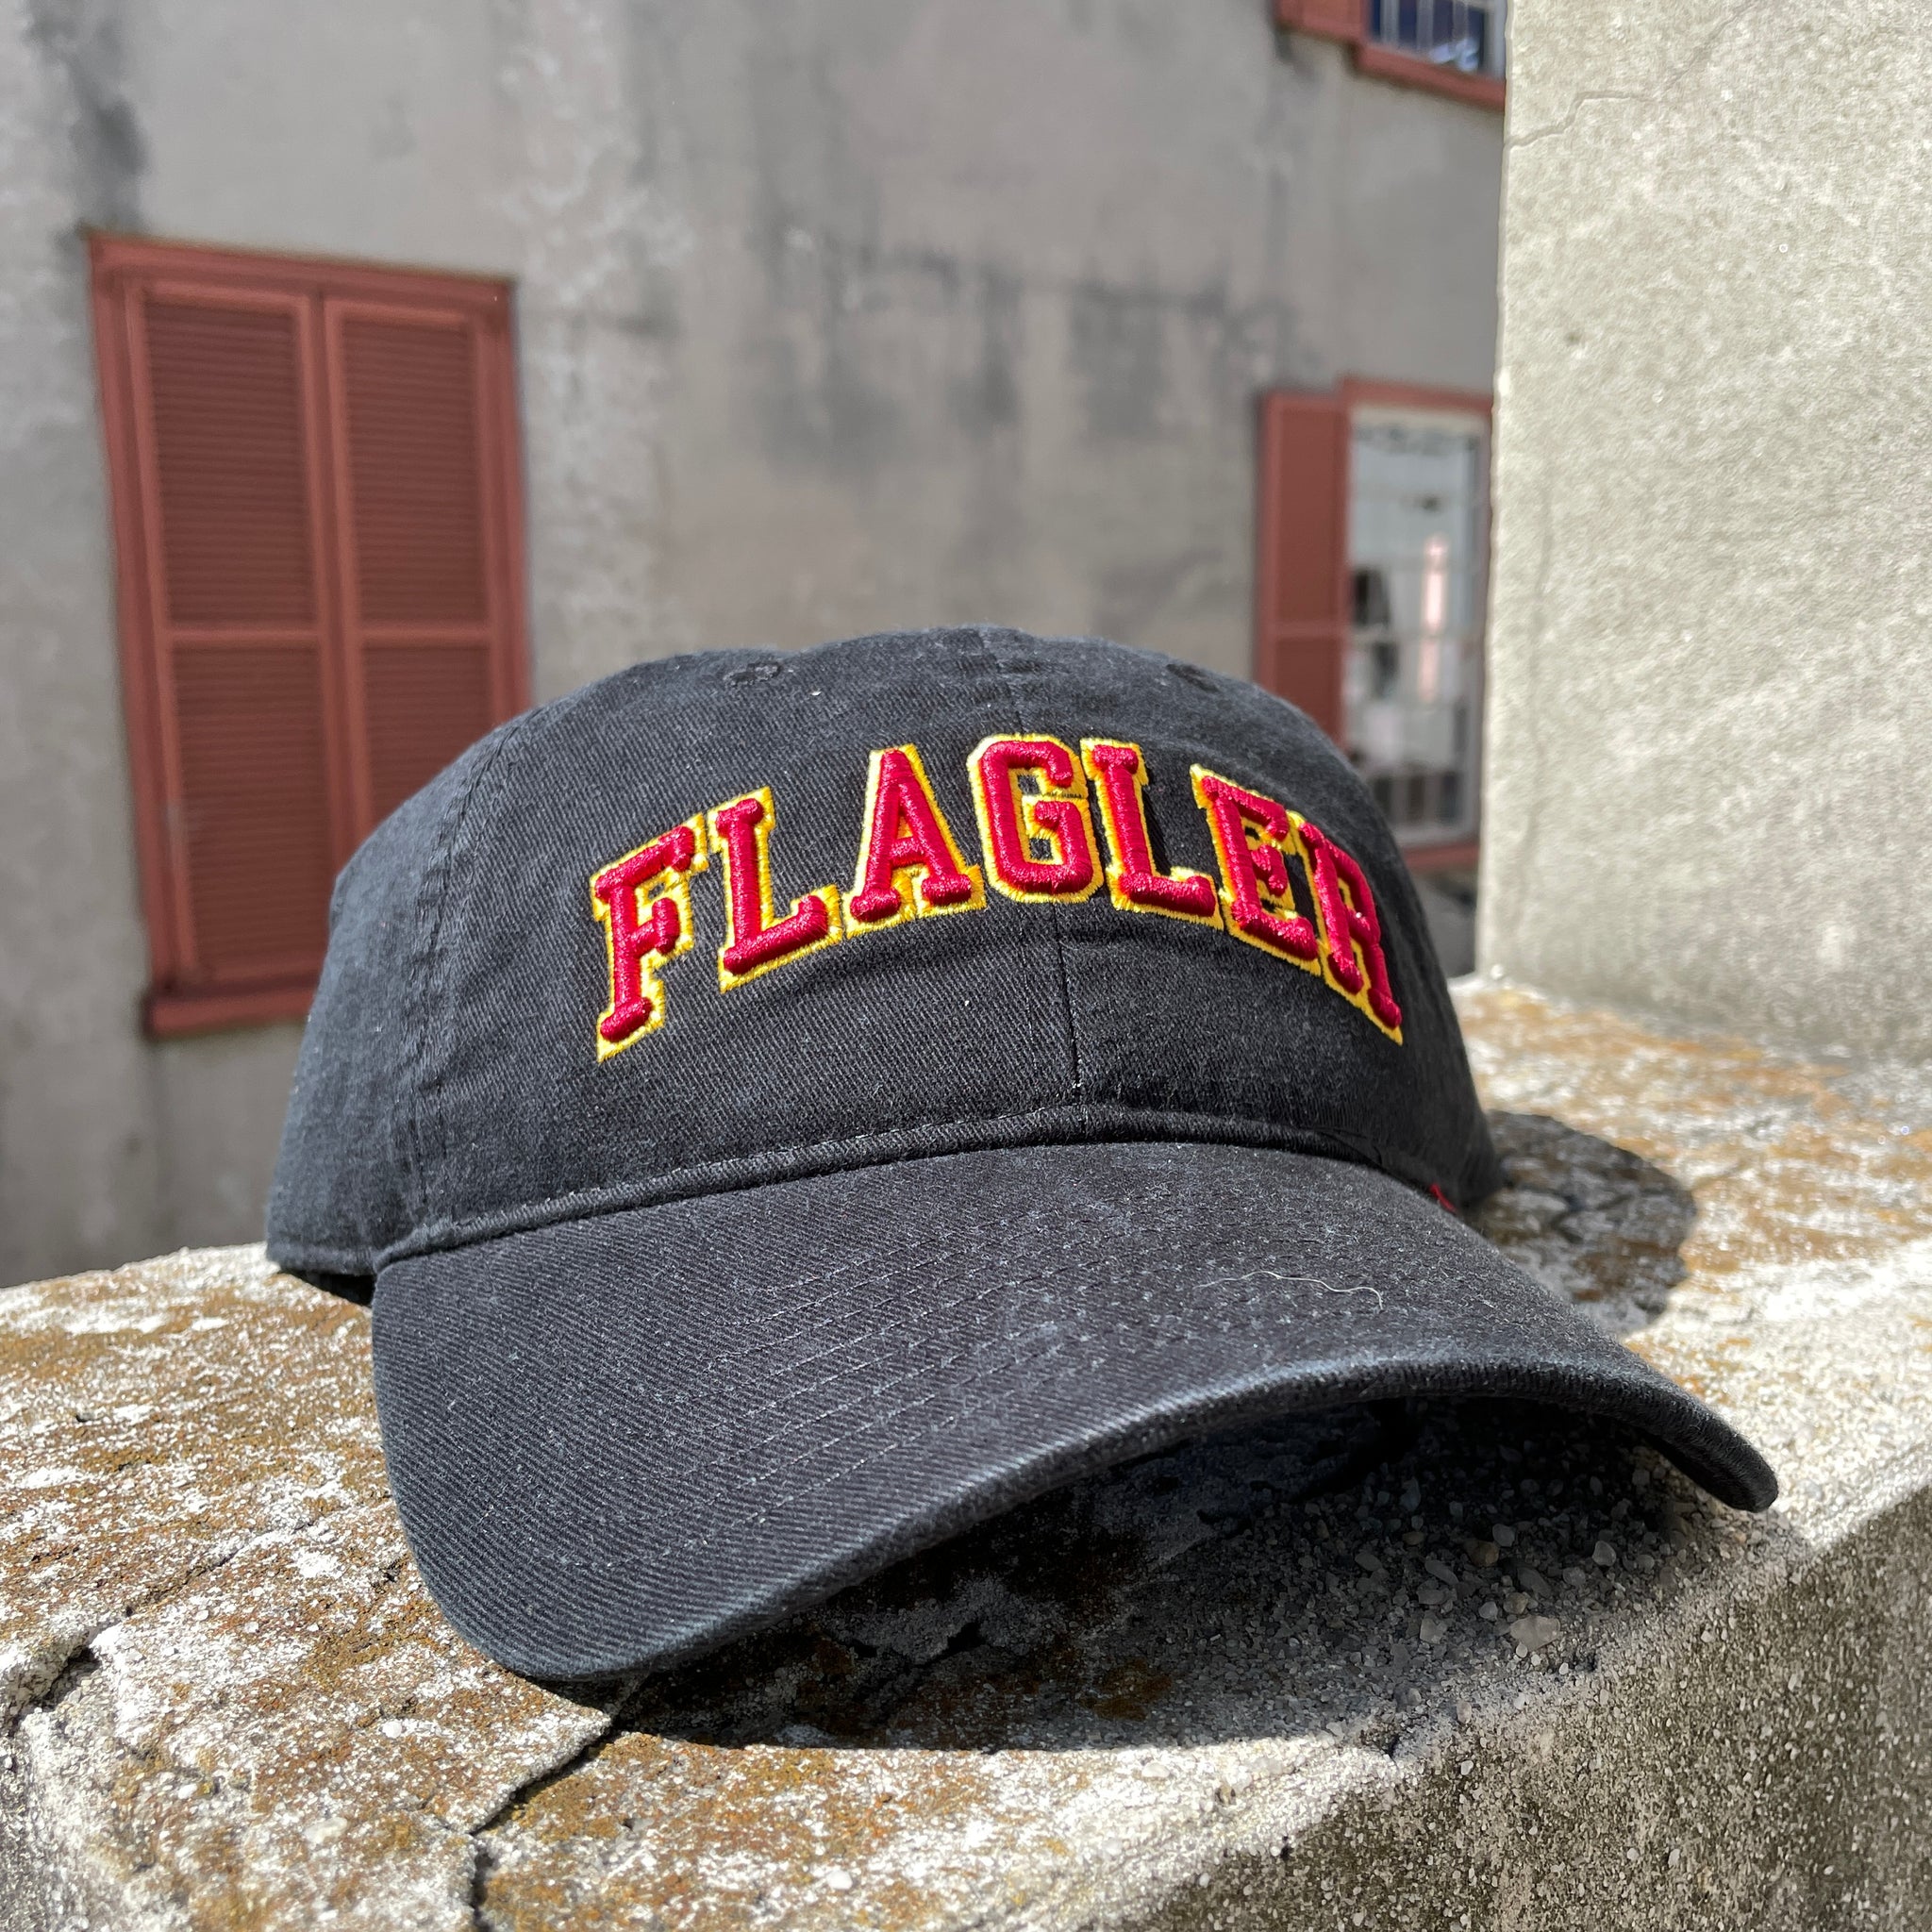 Black hat with red letters saying Flagler